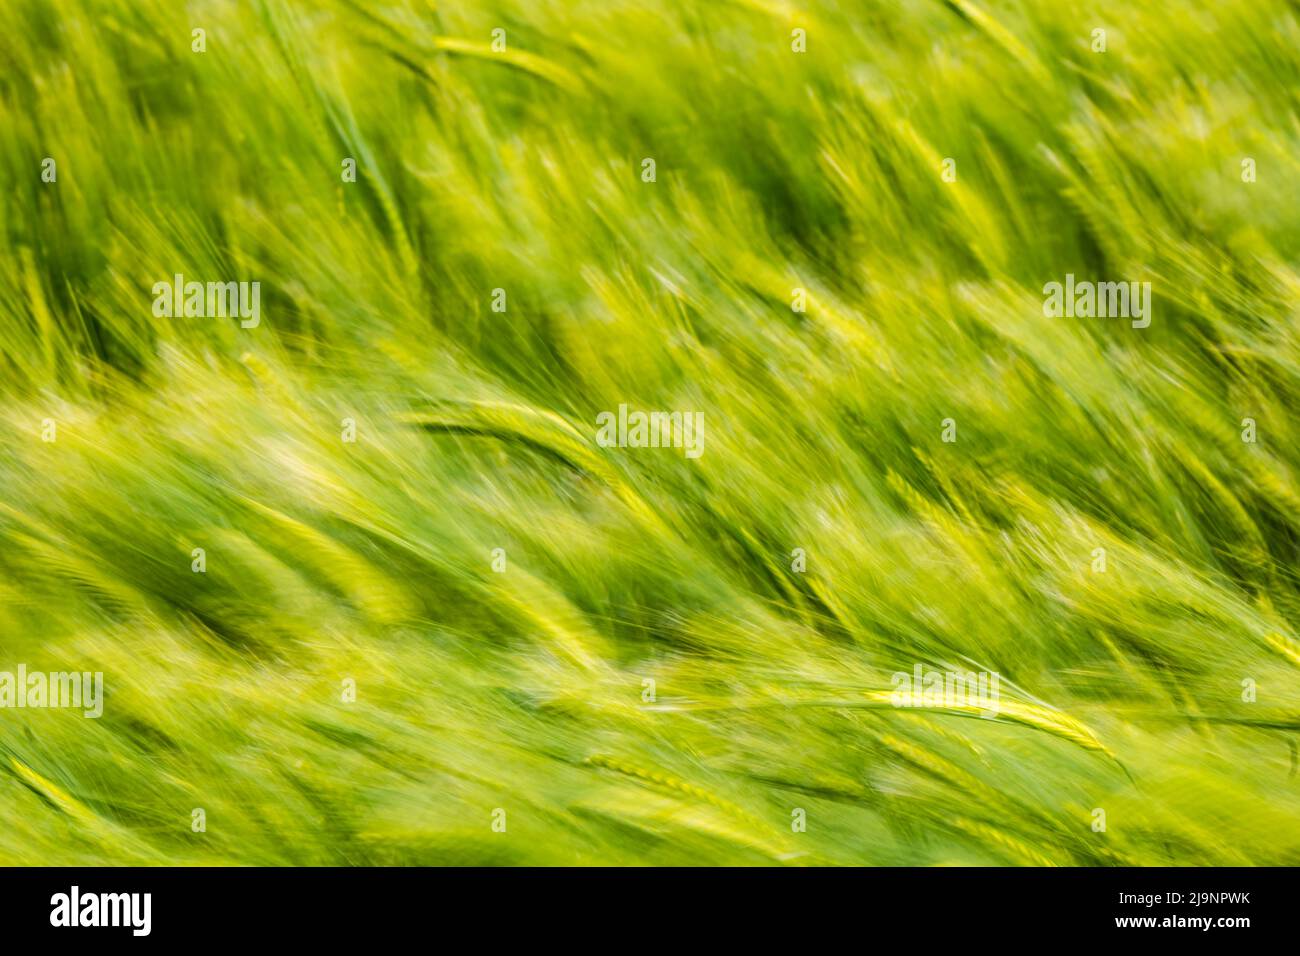 Abstract of a crop field of green barley blowing in the wind on a windy day causing motion blur, Scotland, UK Stock Photo